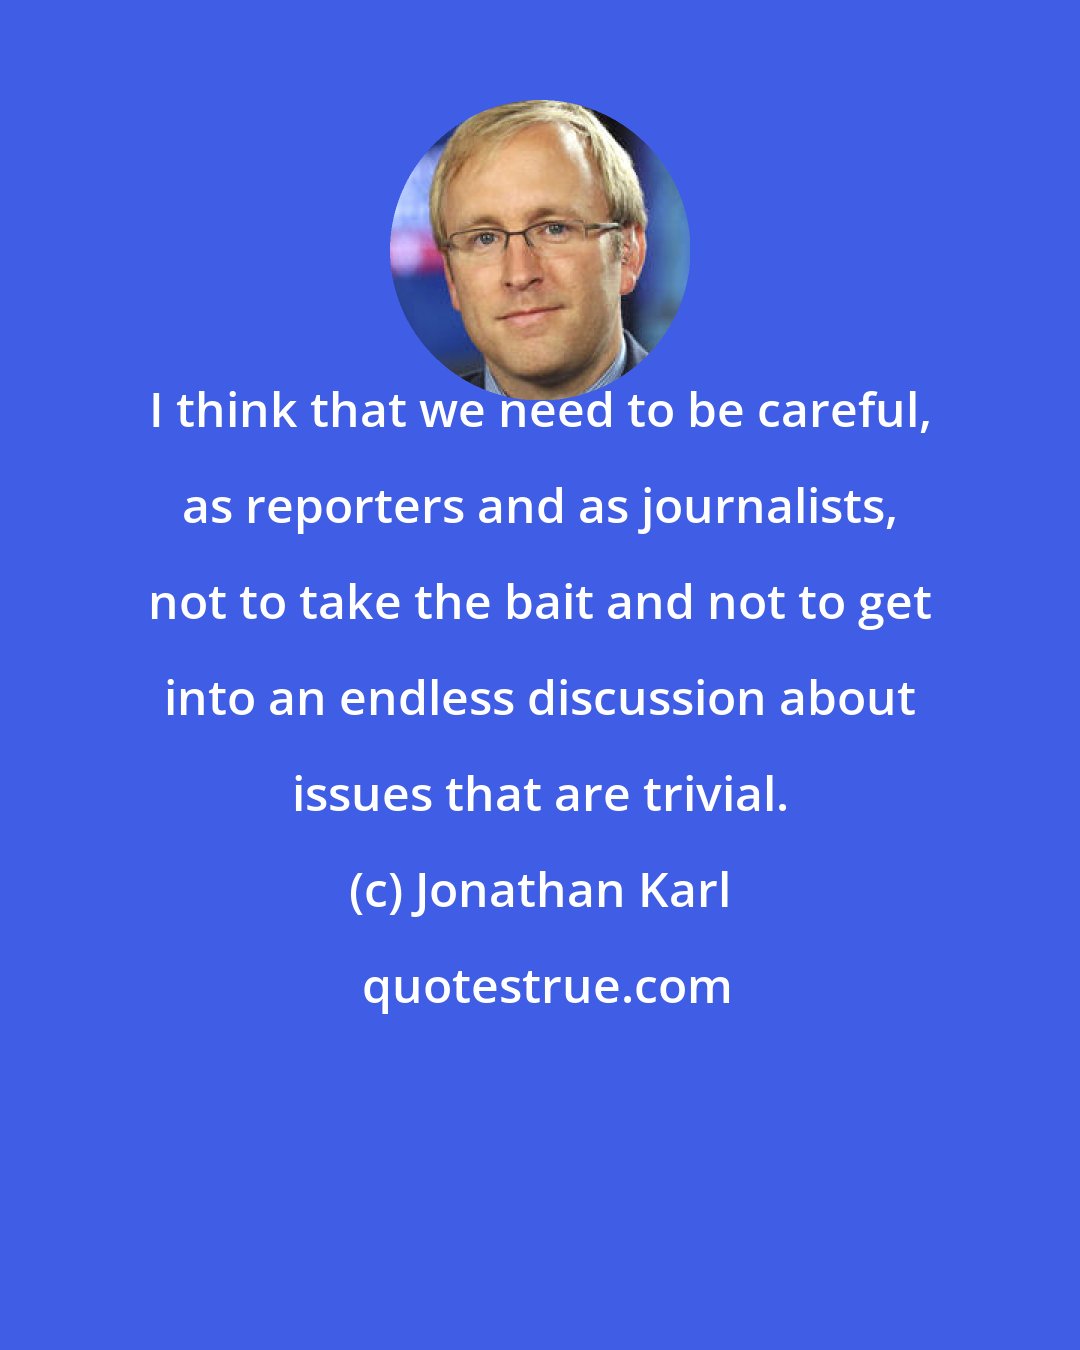 Jonathan Karl: I think that we need to be careful, as reporters and as journalists, not to take the bait and not to get into an endless discussion about issues that are trivial.